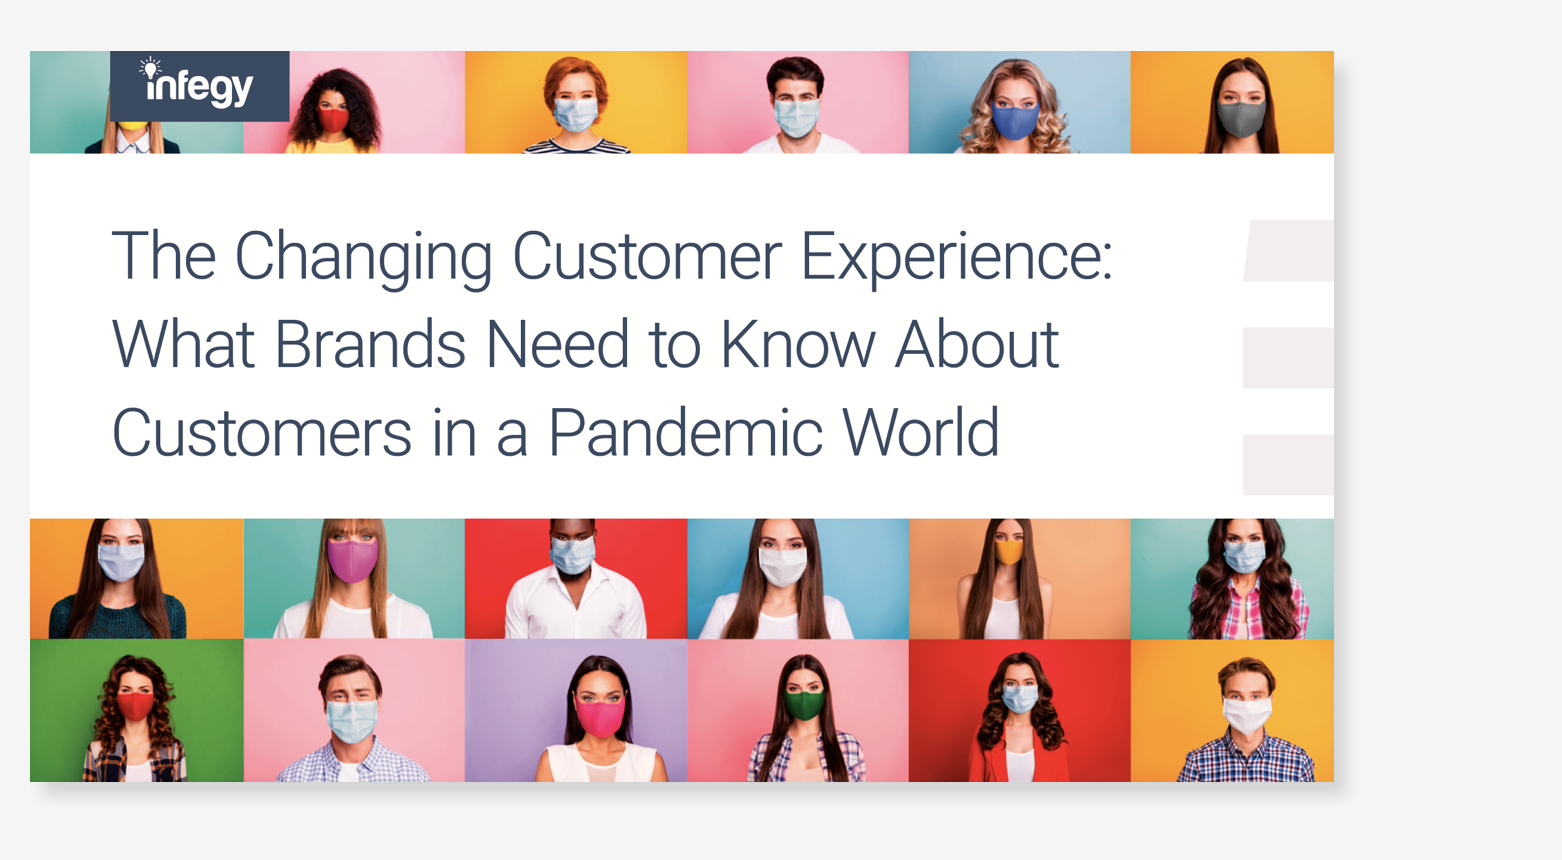 Consumer Experiences in a Pandemic World: What Brands Need to Know